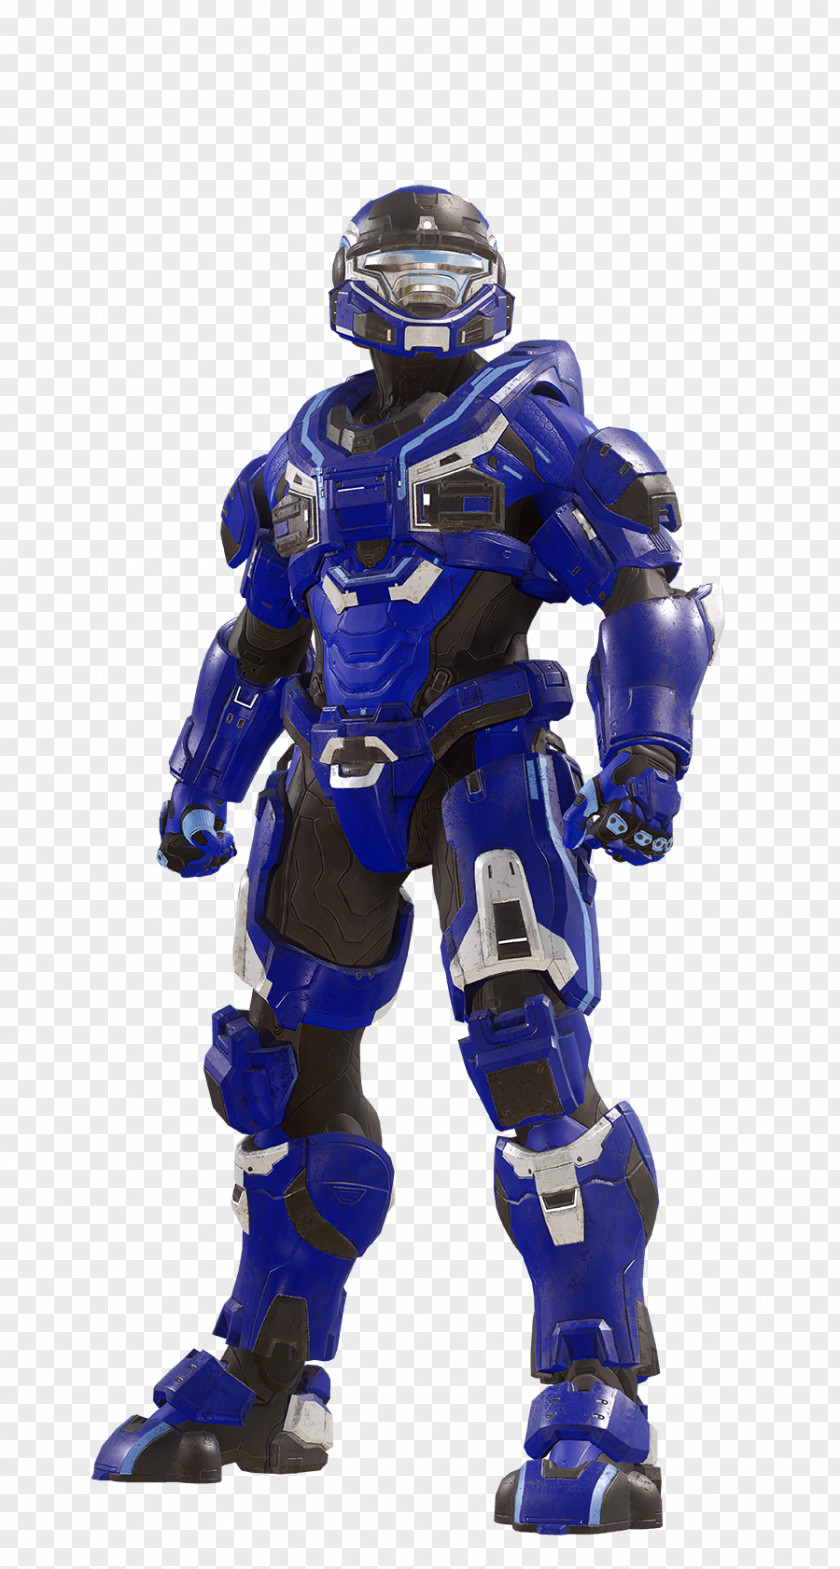 Armour Halo 5: Guardians Halo: Reach 4 The Master Chief Collection PNG